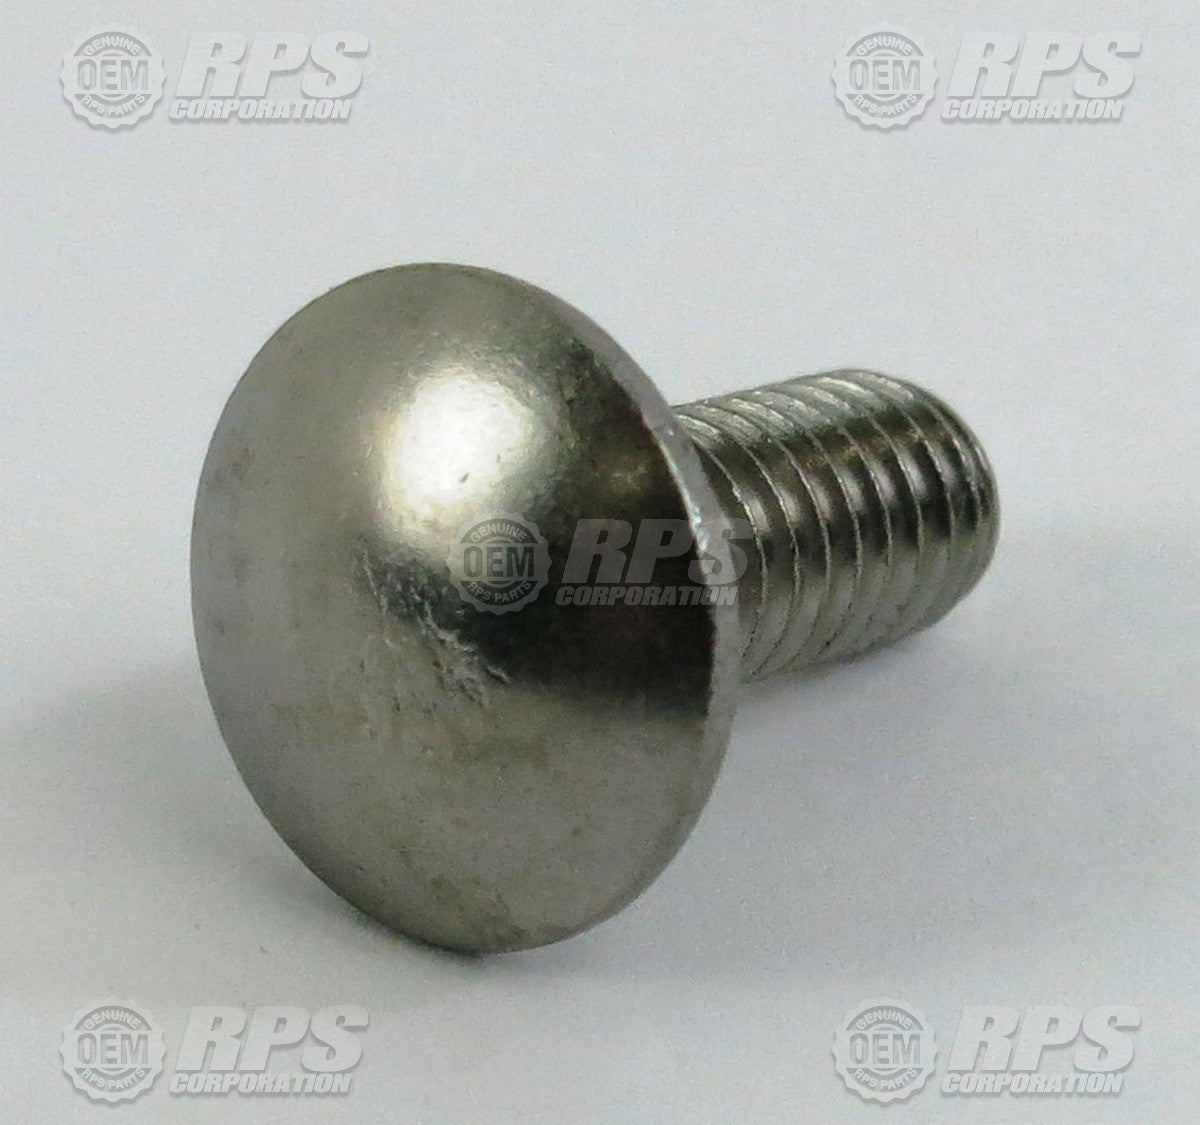 FactoryCat/Tomcat H-74429, Bolt,Carriage,5/16-18x3/4" Stainless